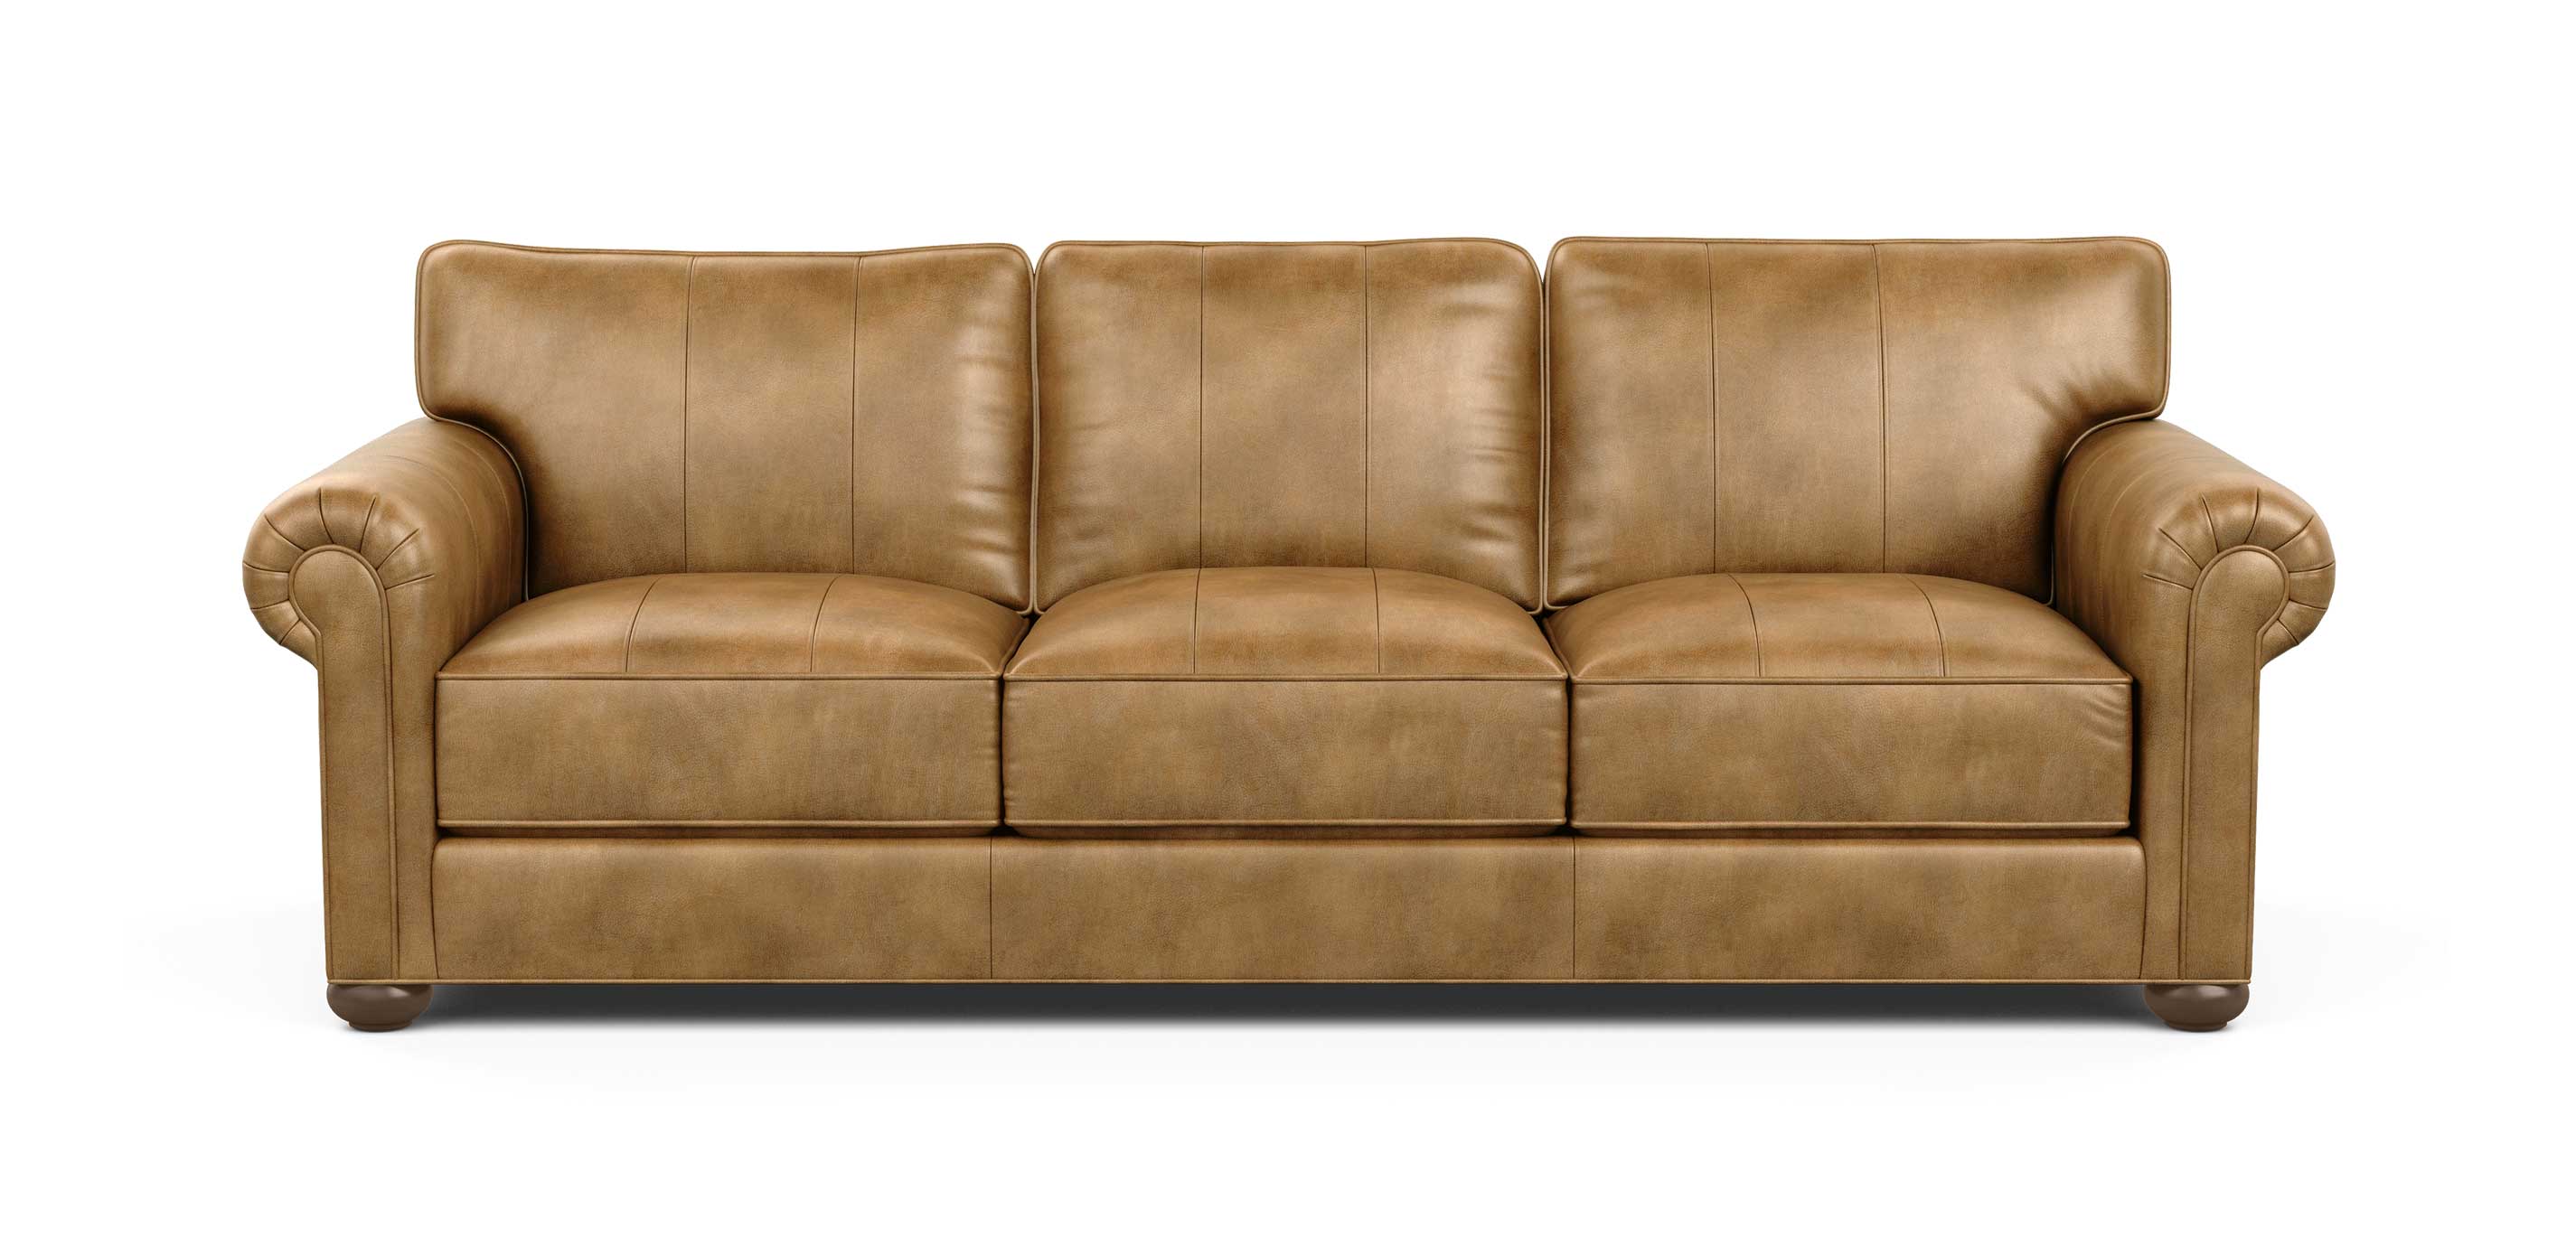 Richmond Leather Sofa Sofas And Loveseats Ethan Allen